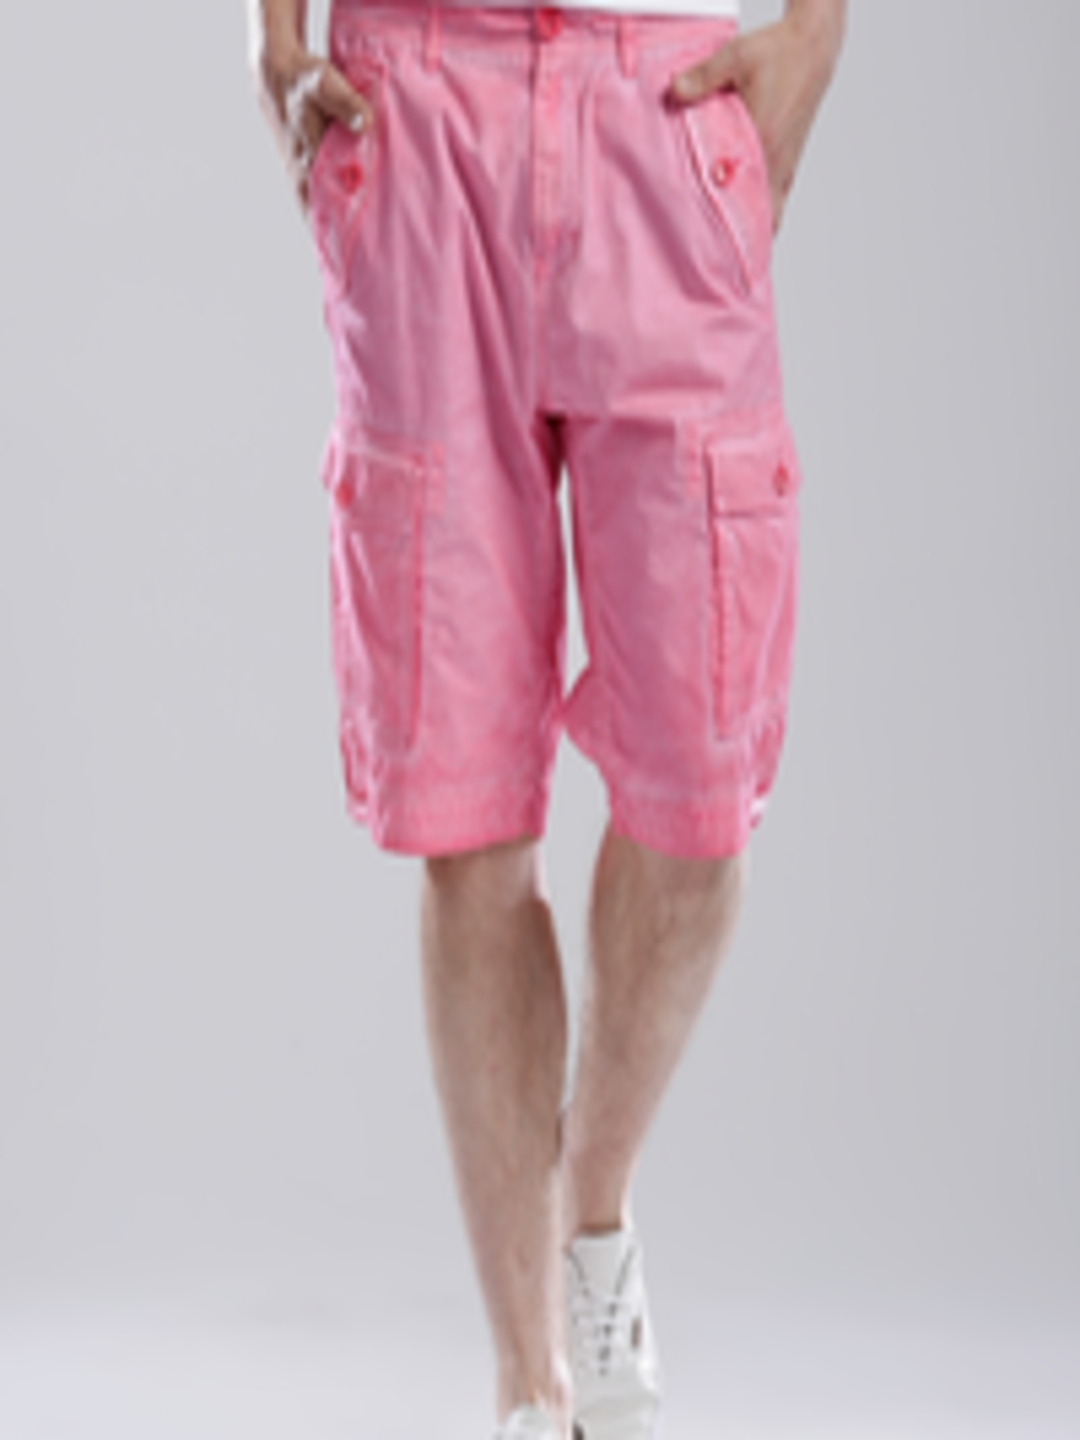 Buy GUESS Pink Washed Cargo Shorts - Shorts for Men 1268928 | Myntra